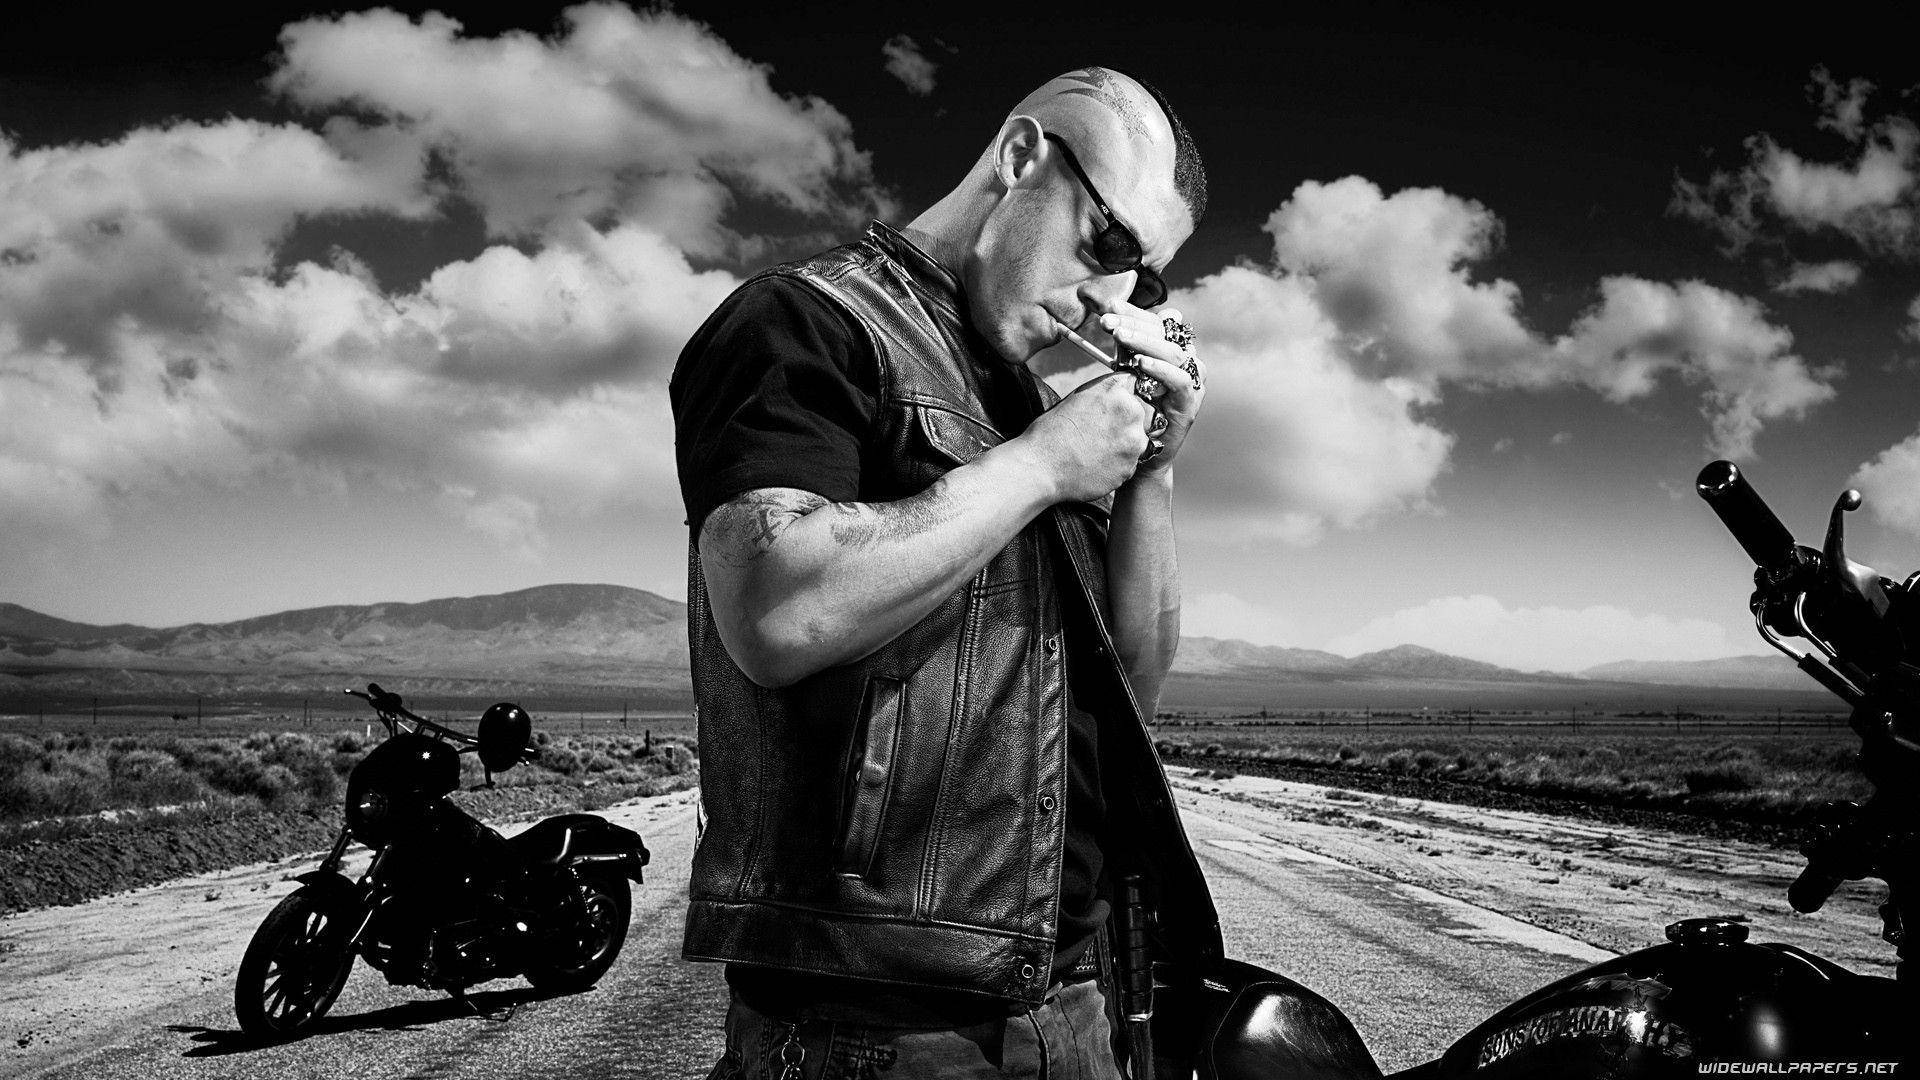 A Man Is Smoking A Cigarette On A Motorcycle Background